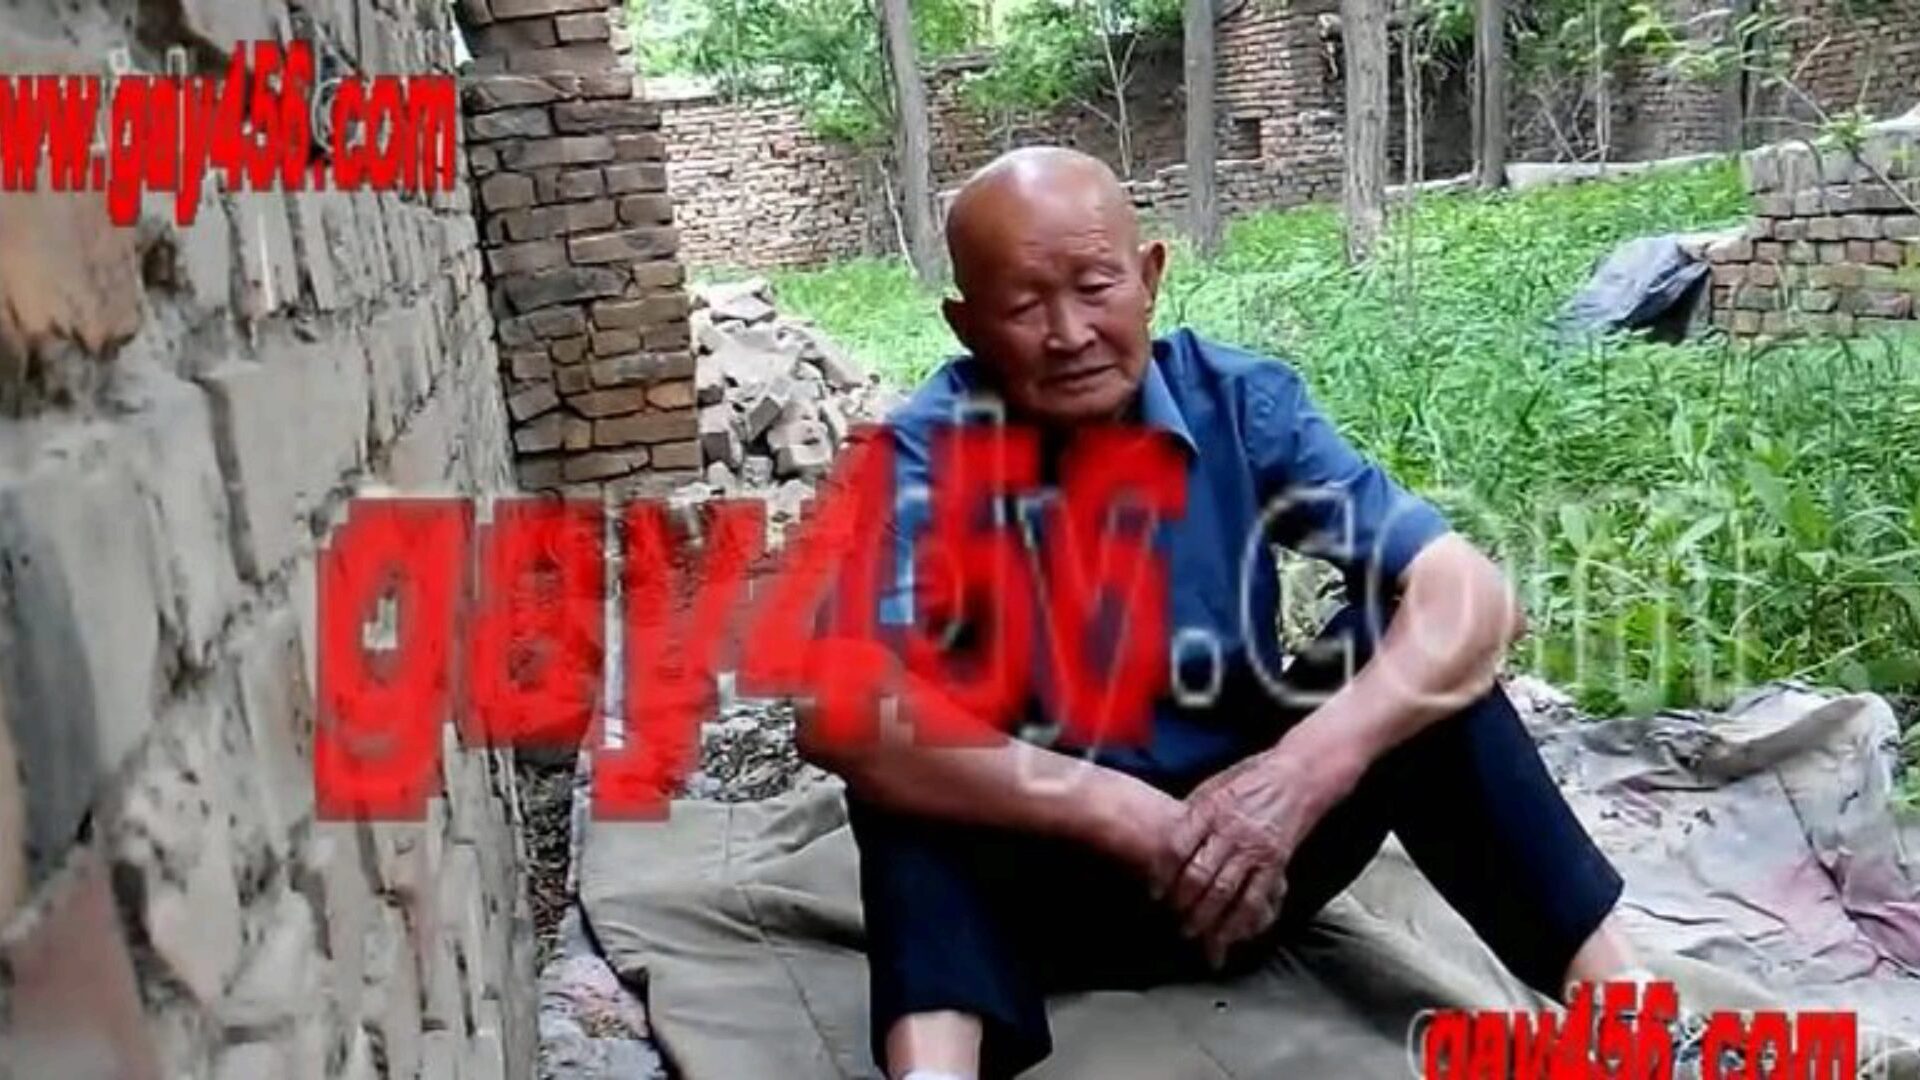 Chinese Oldman in Public